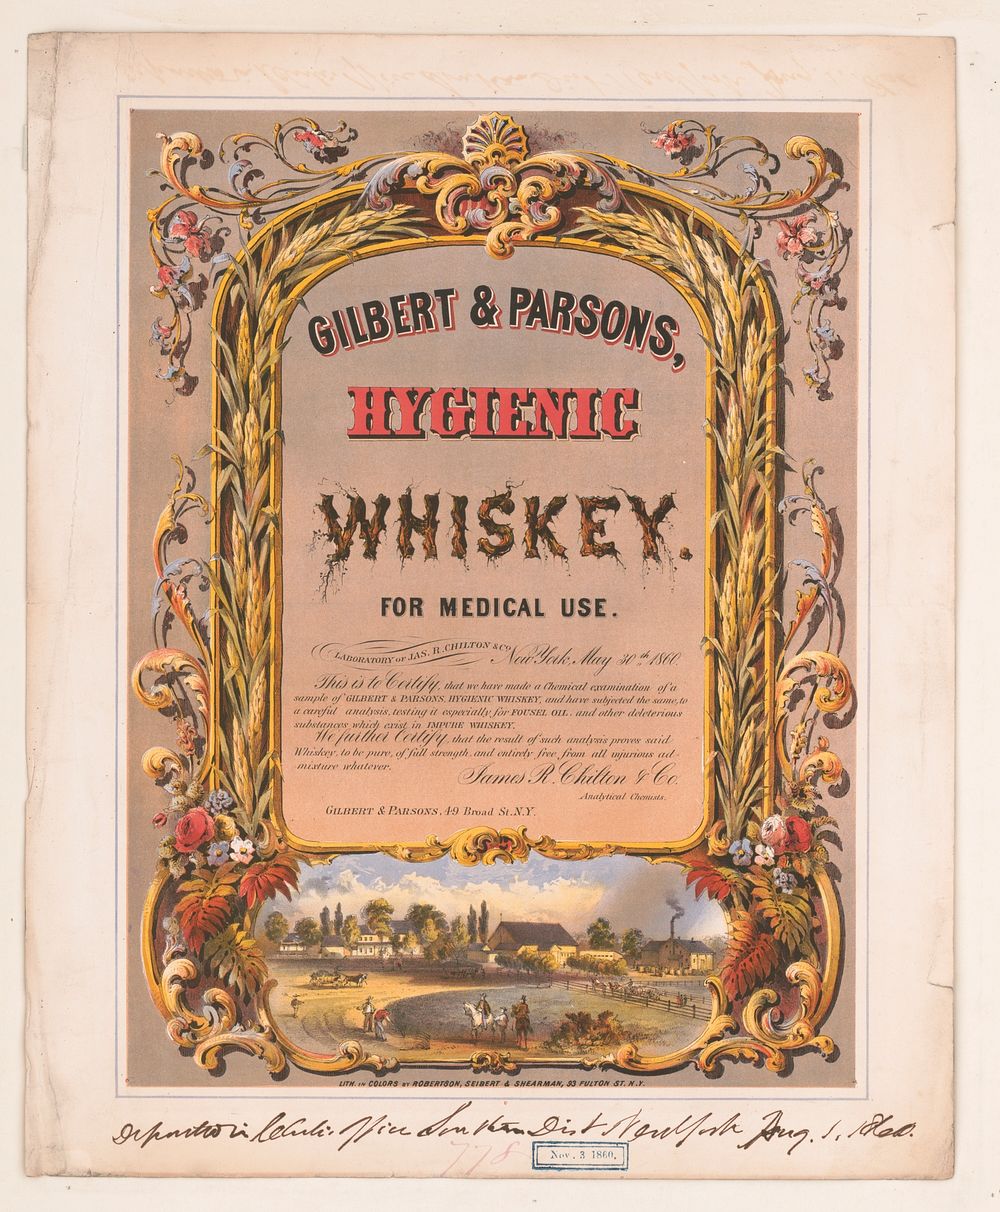 Gilbert & Parsons, hygienic whiskey--for medical use / lith. in colors by Robertson, Seibert & Shearman, N.Y.